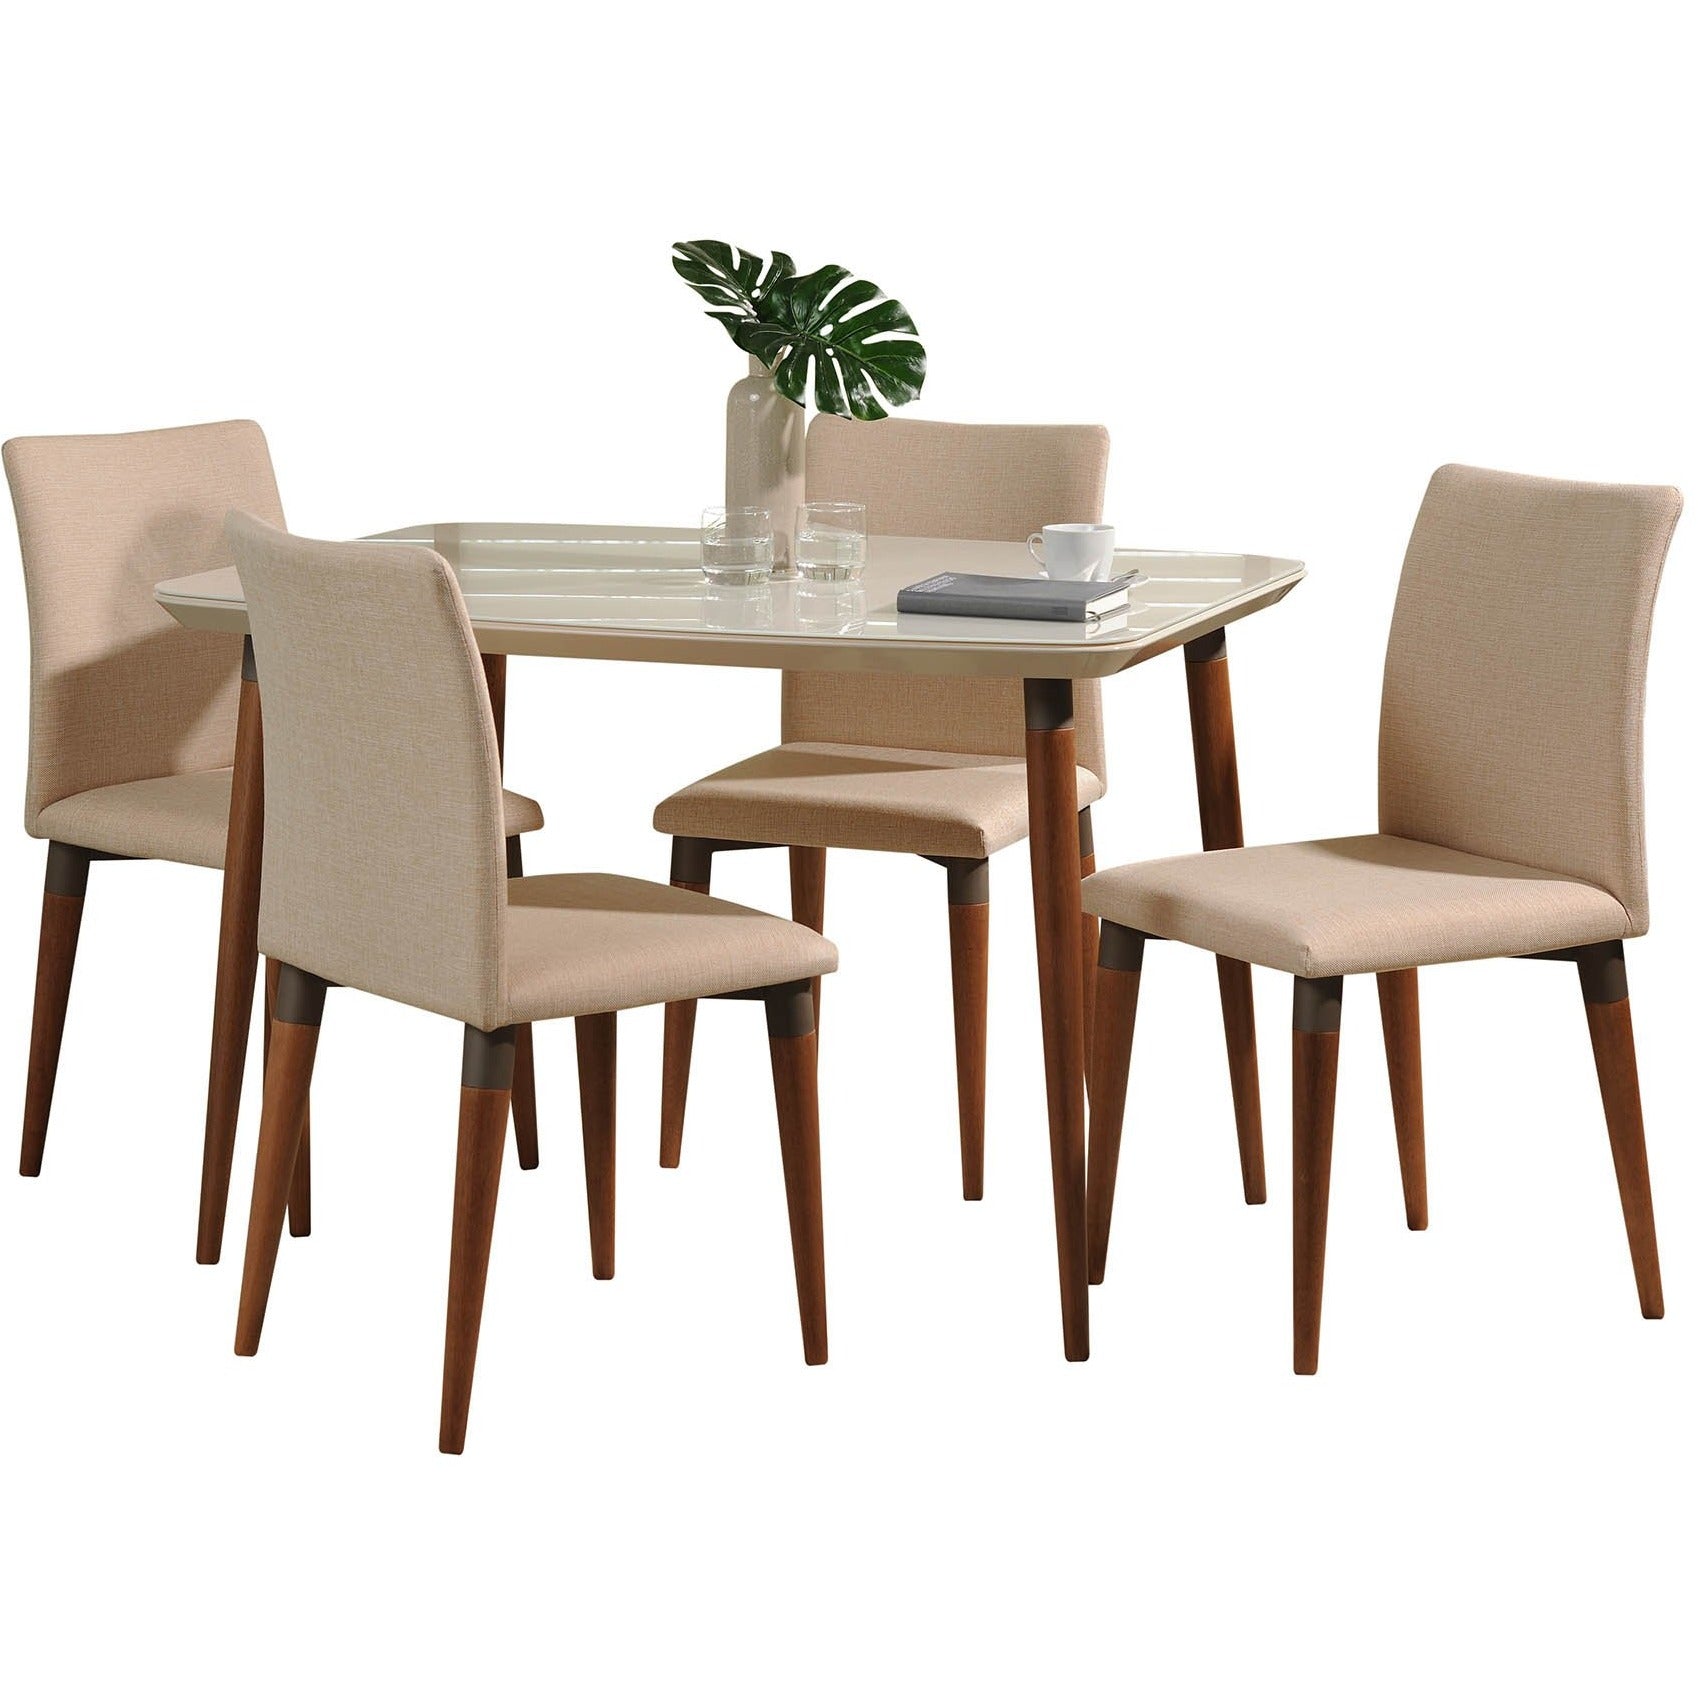 Manhattan Comfort 5-Piece Charles 45.27" Dining Set with 4 Dining Chairs in Off White and Dark Beige-Minimal & Modern